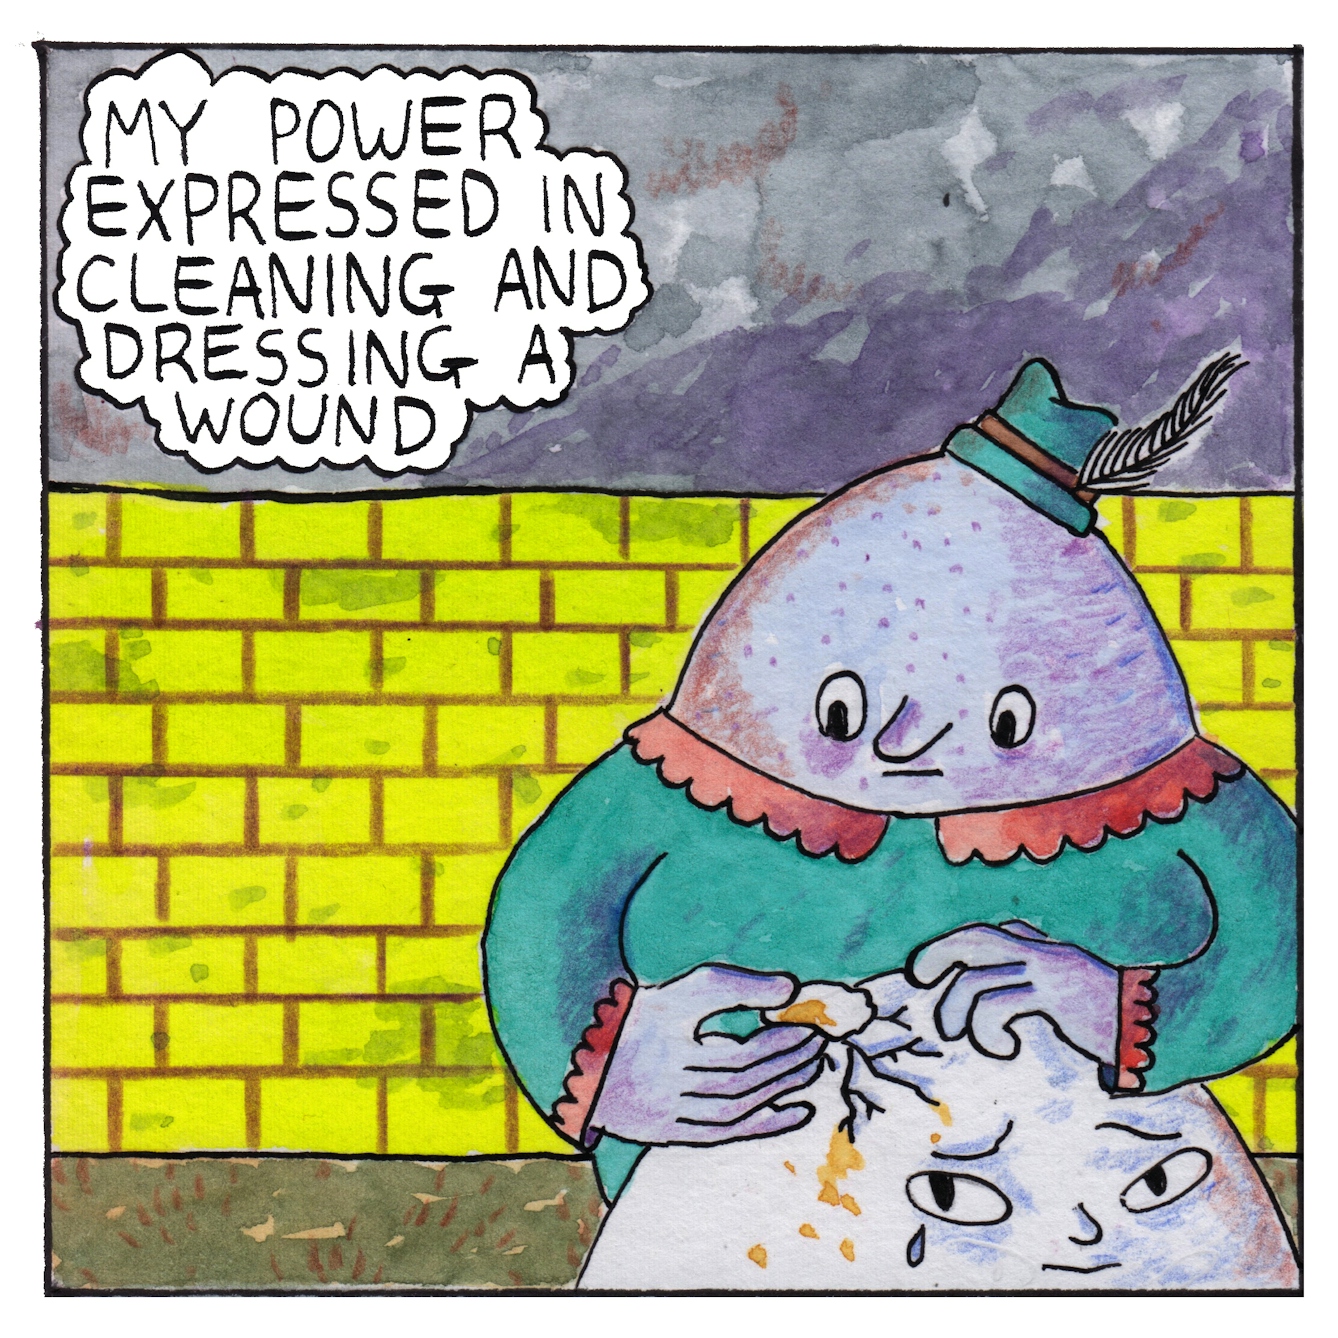 Panel 7 of the comic 'Egg Inc.': An egg-shaped character dressed in green with green hat tries to repair the head of another egg-shaped character whose head has been cracked. Behind them is a yellow brick wall, grey skies above and dark green grass below. A text bubble says "My power expressed in cleaning and dressing a wound."